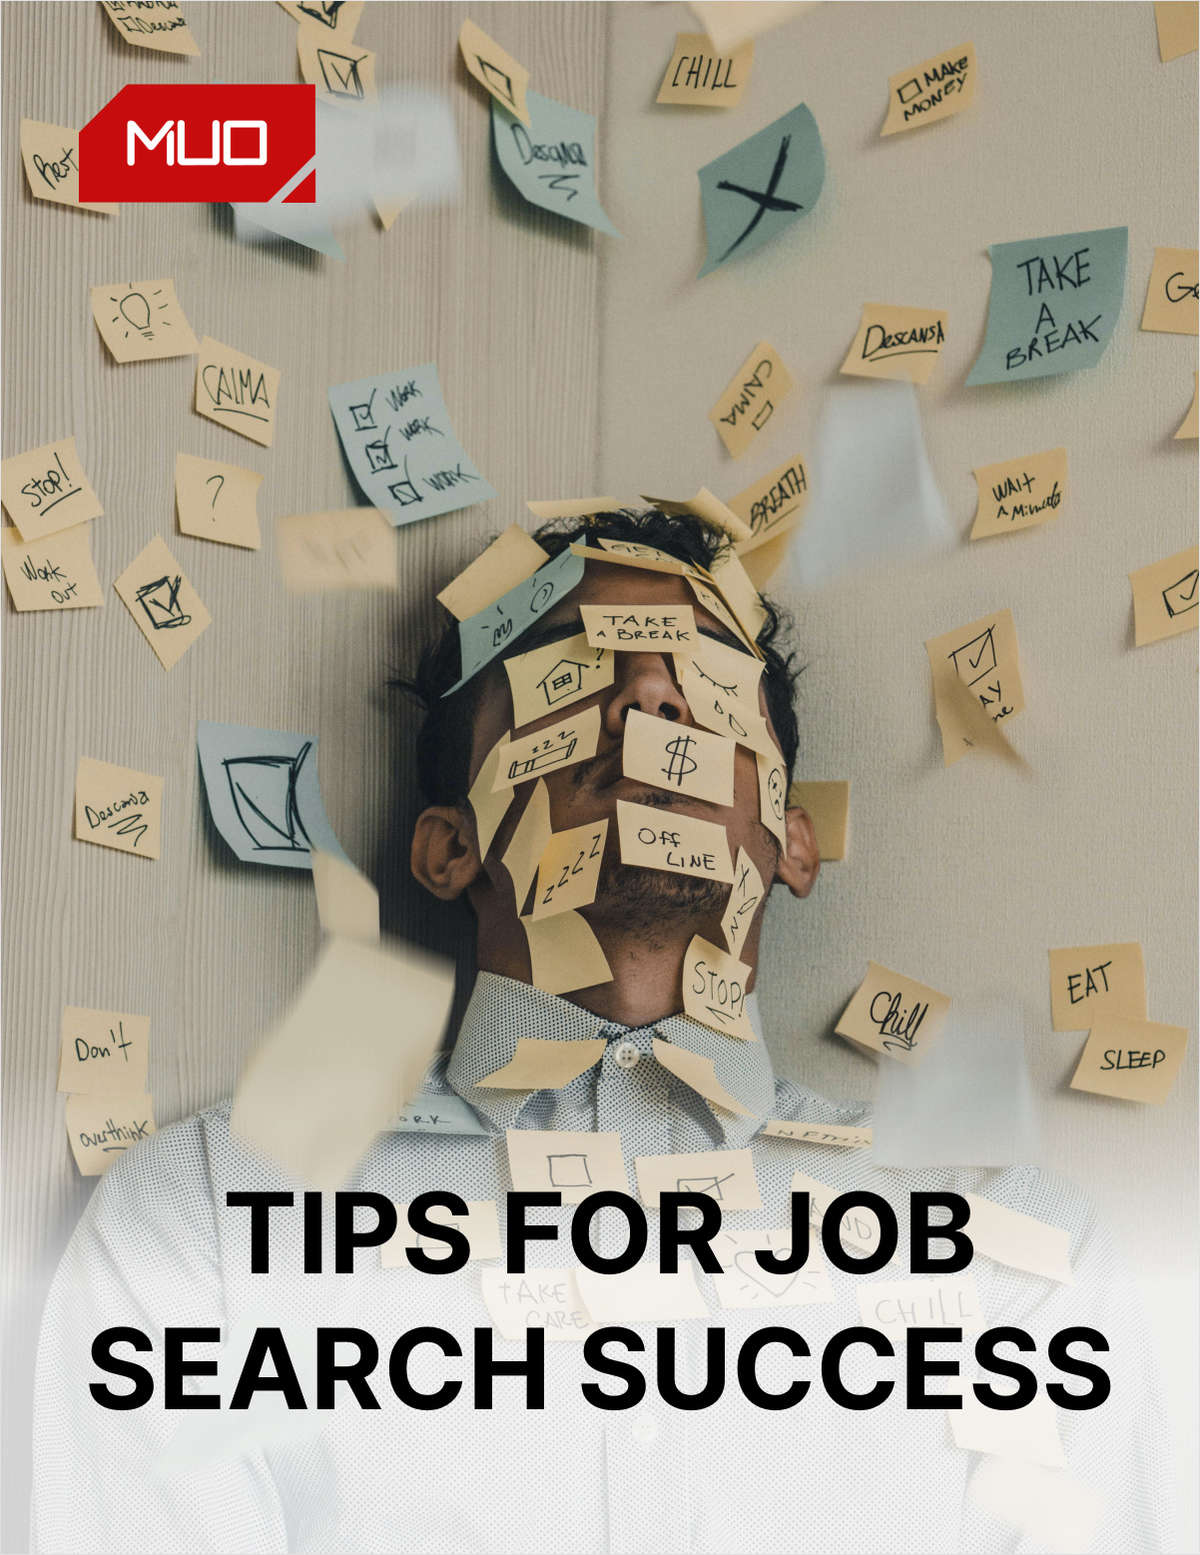 Looking for a Job? 50+ Tips for Job Search Success